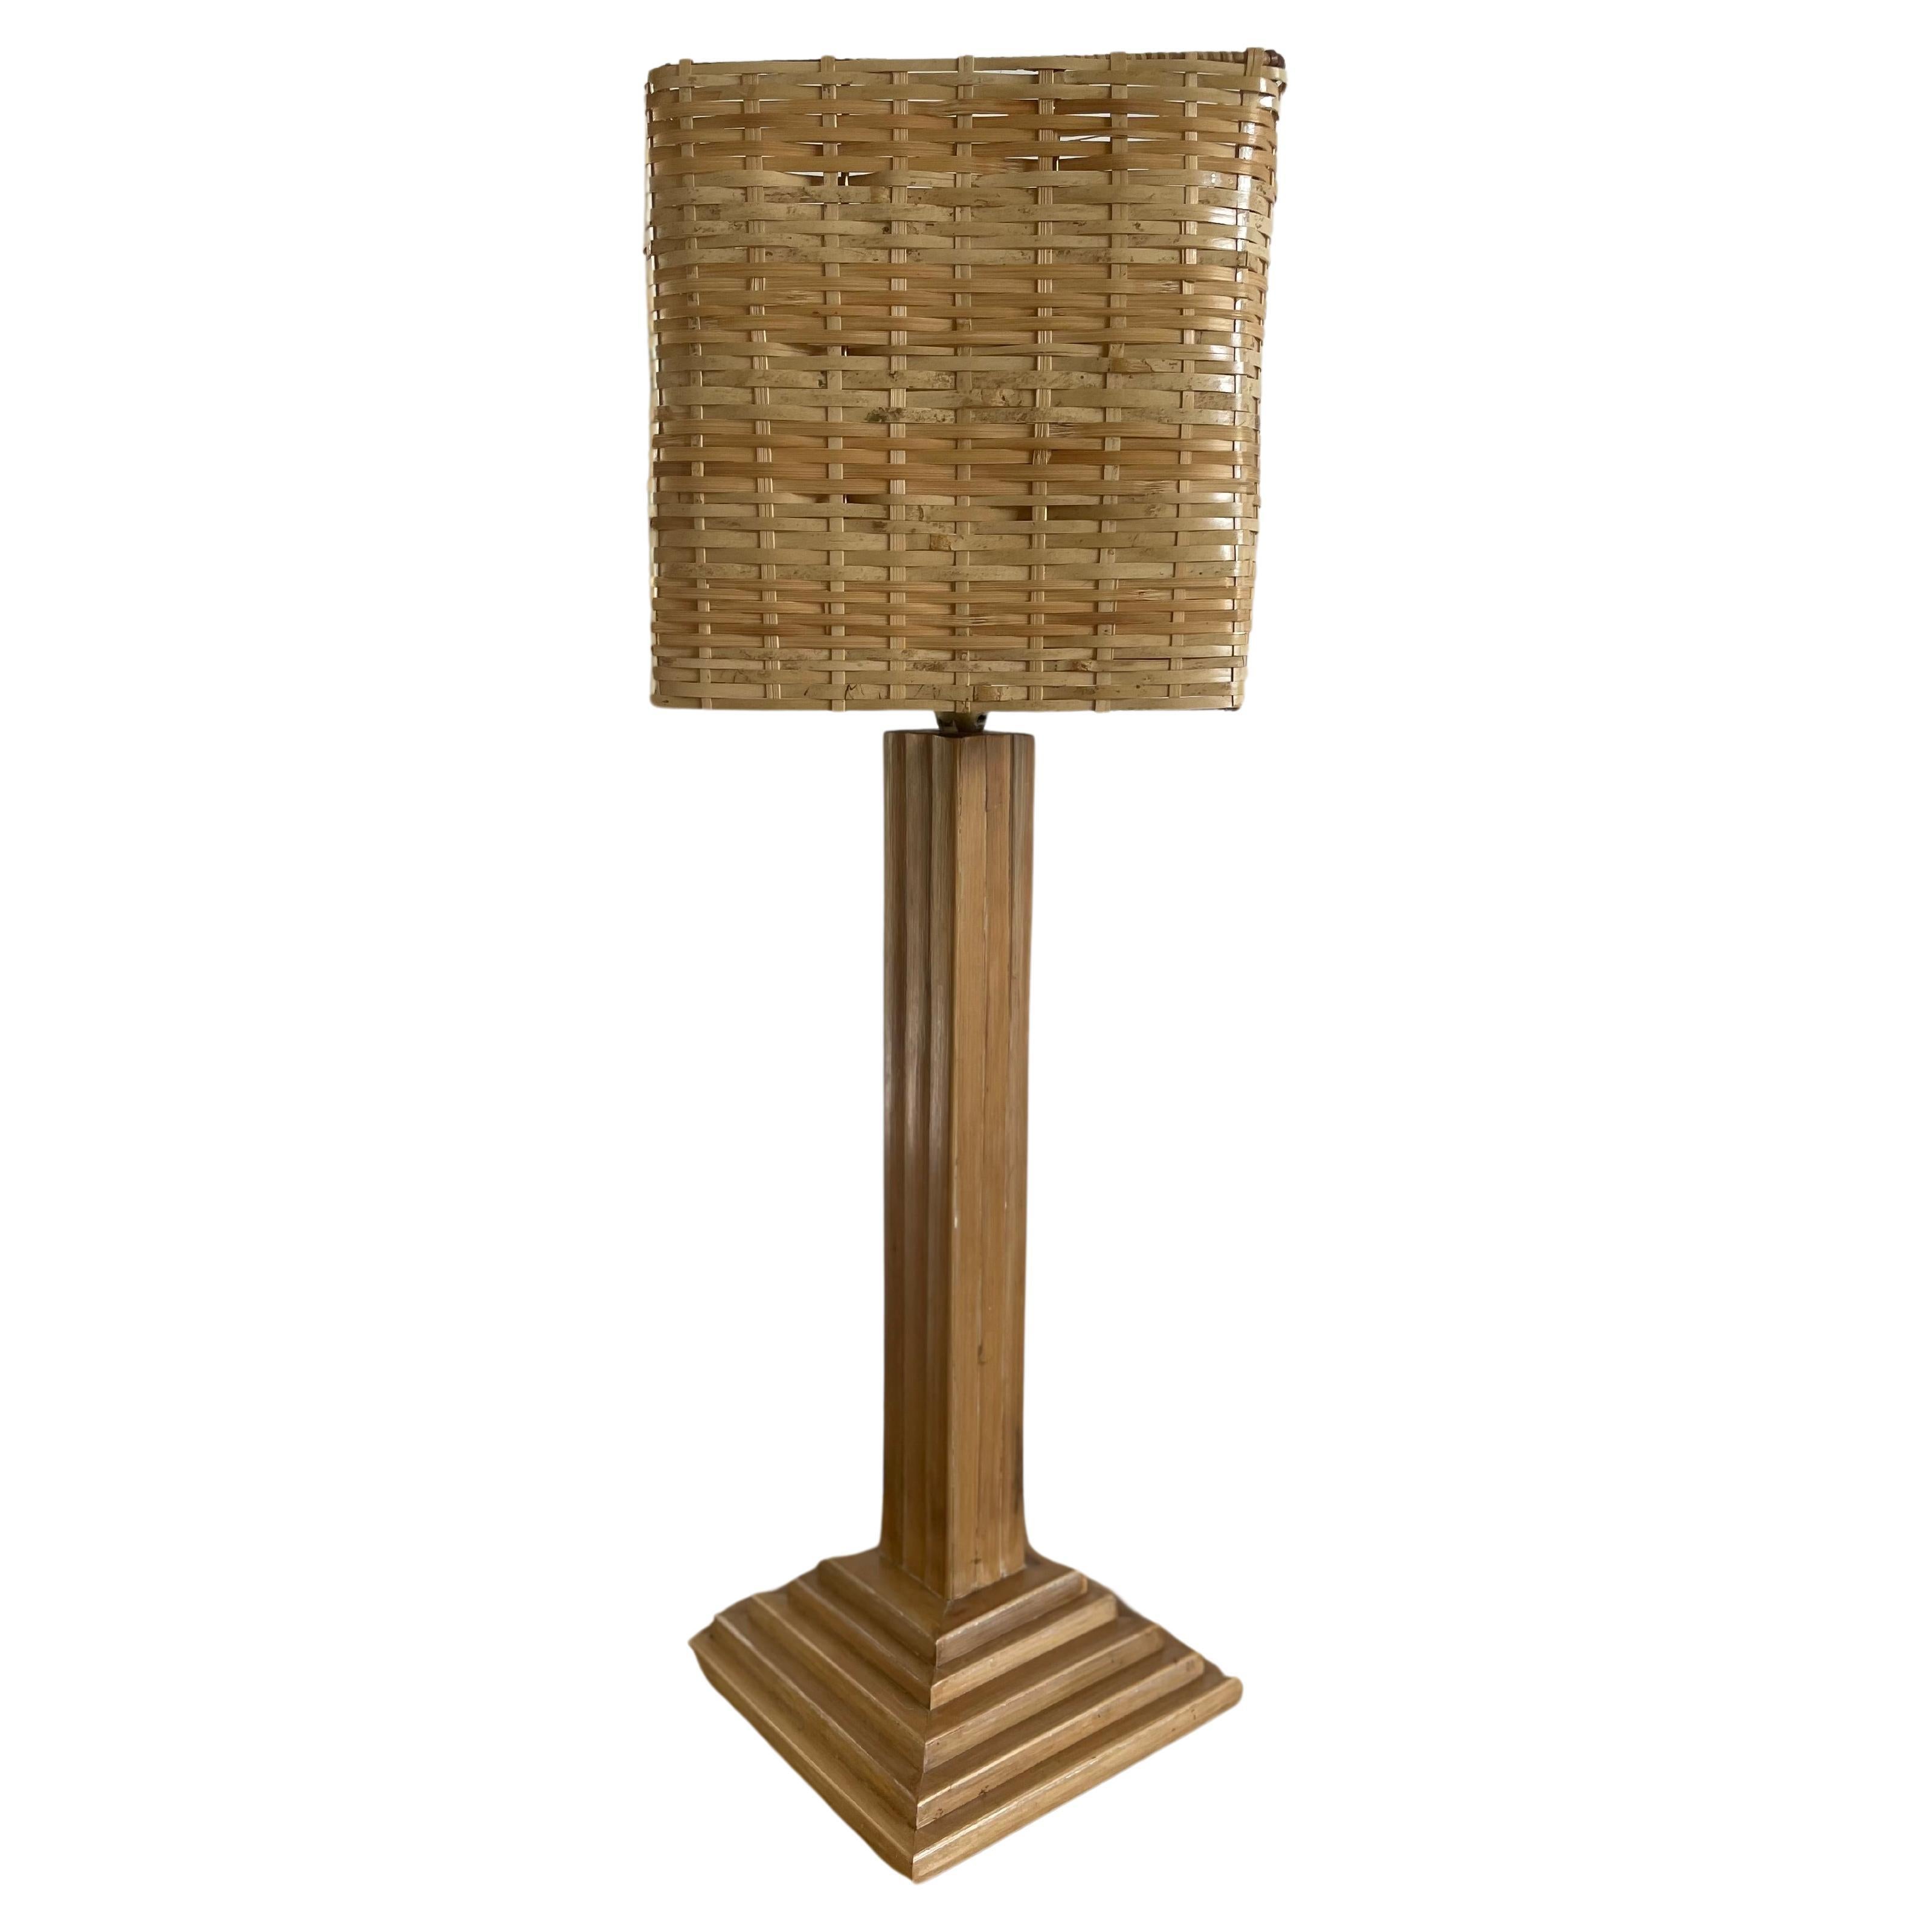 Bamboo modernist table lamp Peter Blake style For Sale